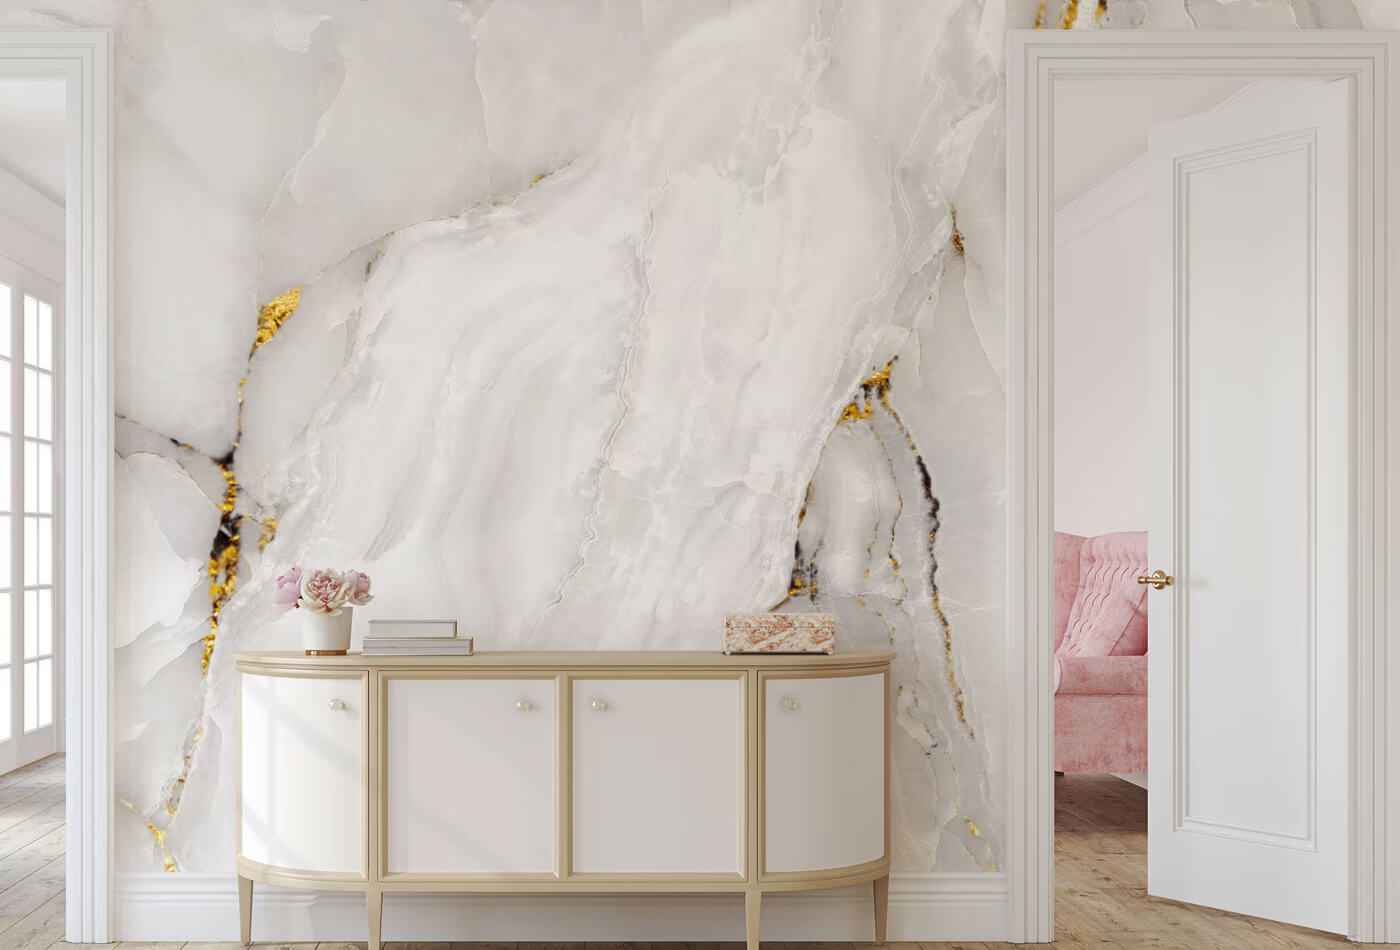 White And Gold Interior Design With These Fascinating Natural Stones